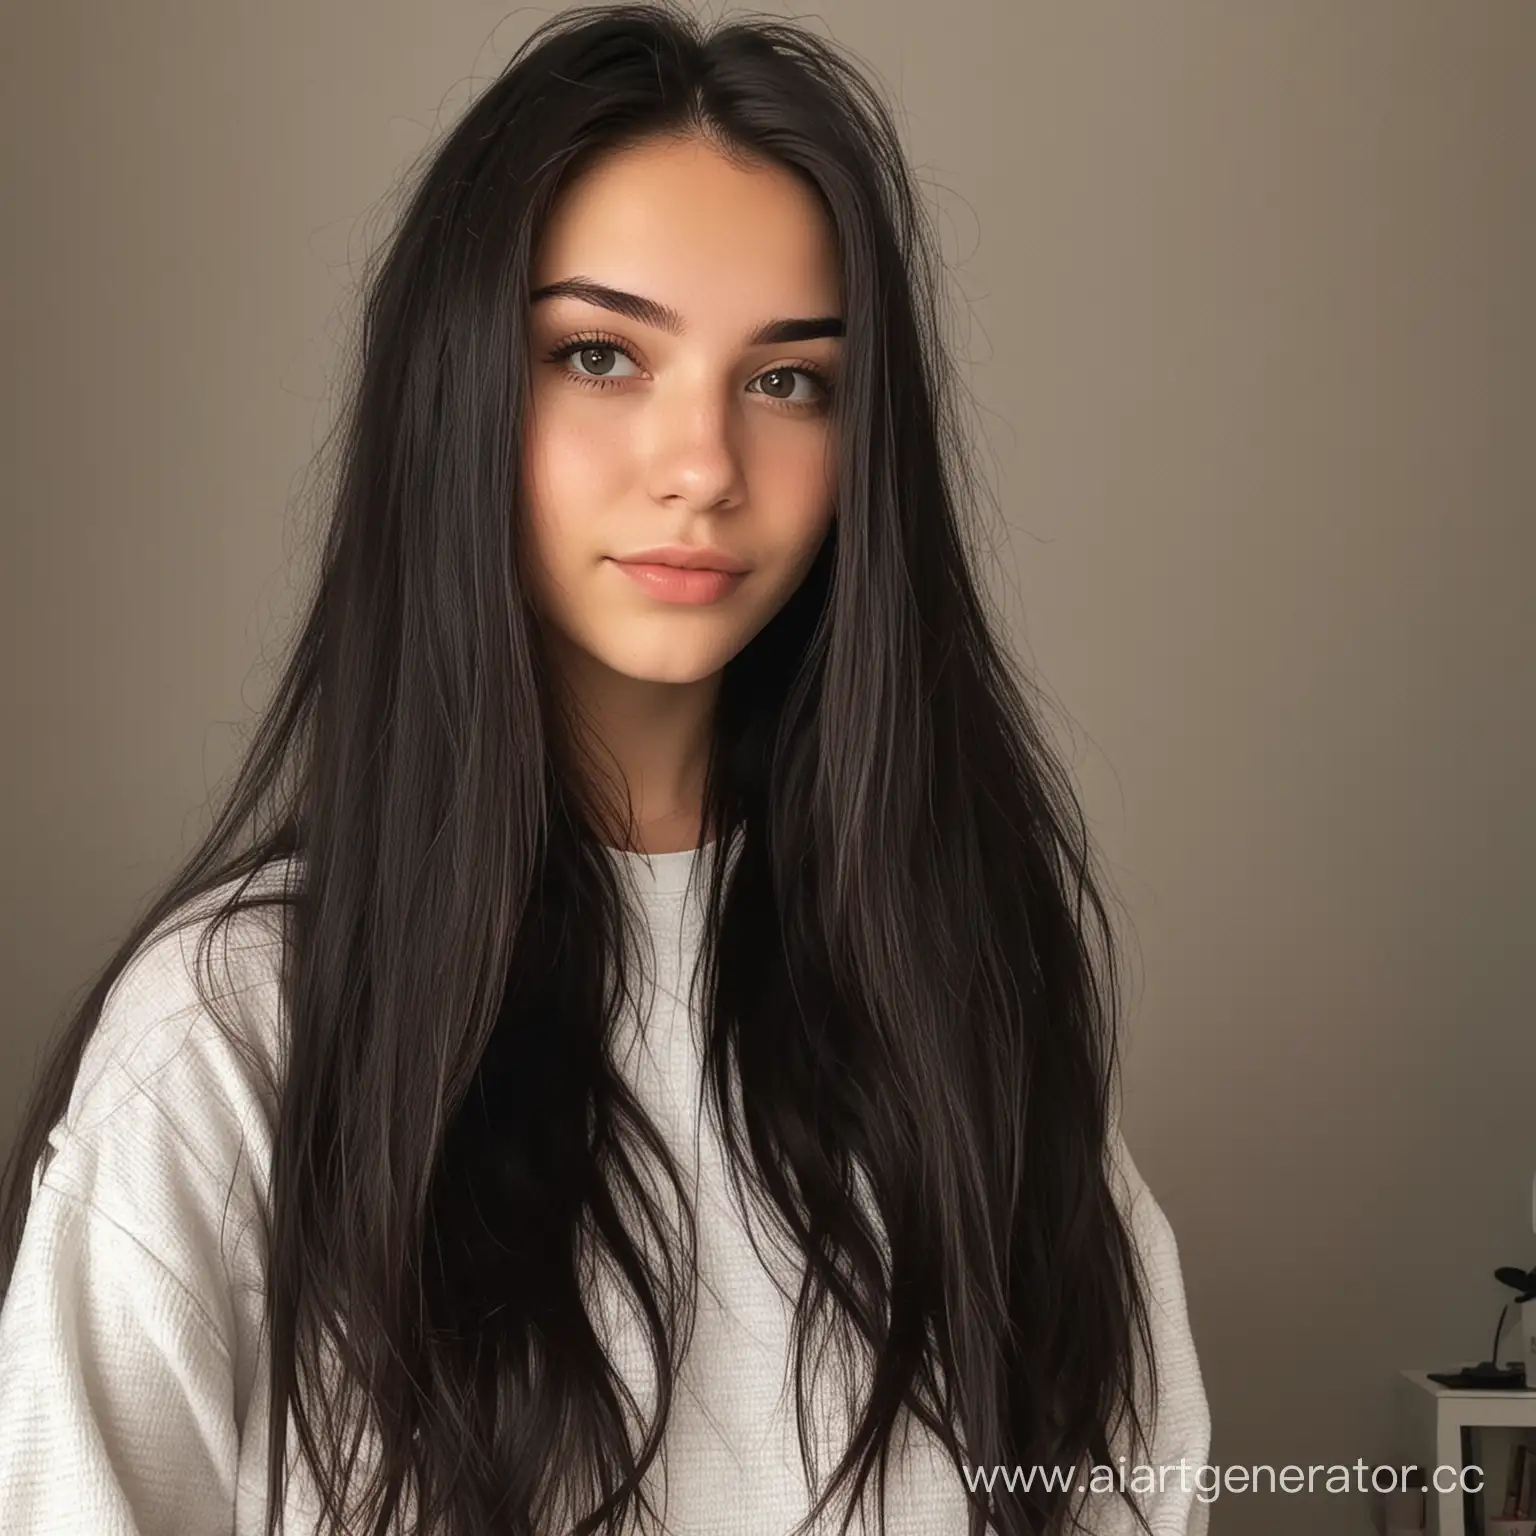 DarkHaired-20YearOld-Woman-with-Timeless-Beauty